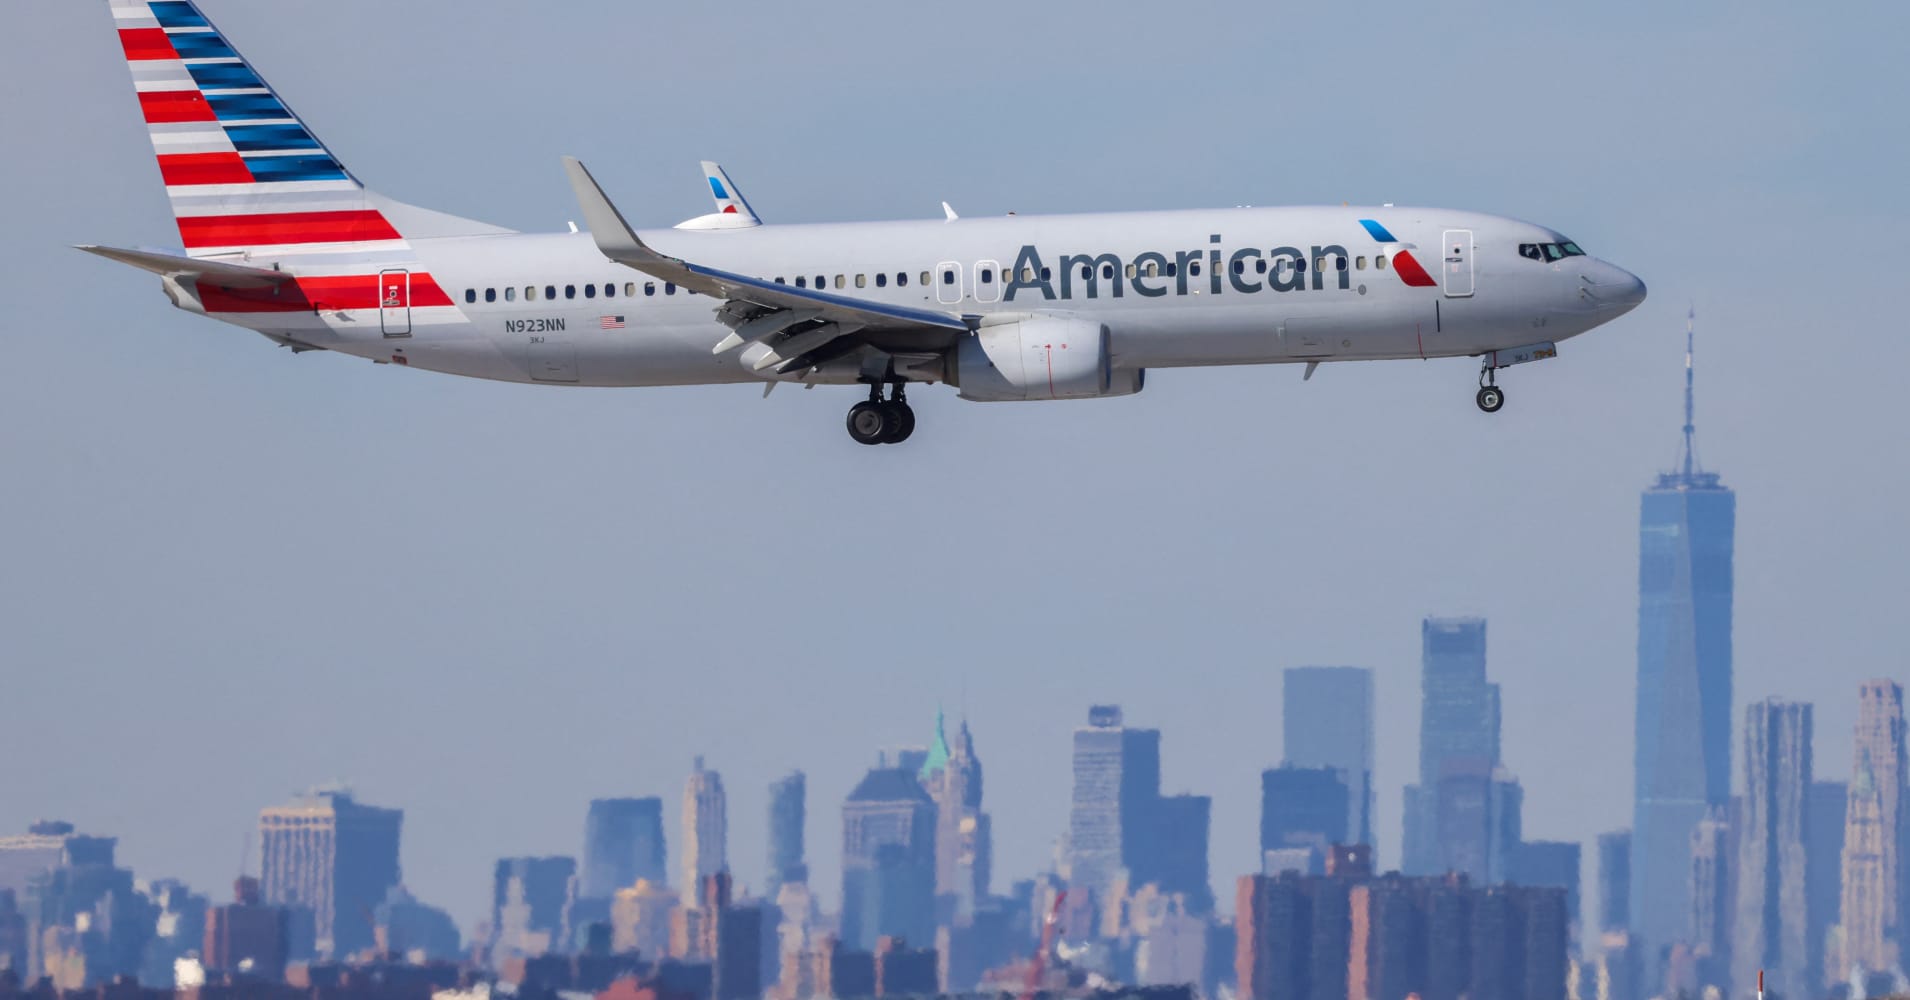 american says 80% of 2024 revenue will come from loyalty program and more expensive tickets